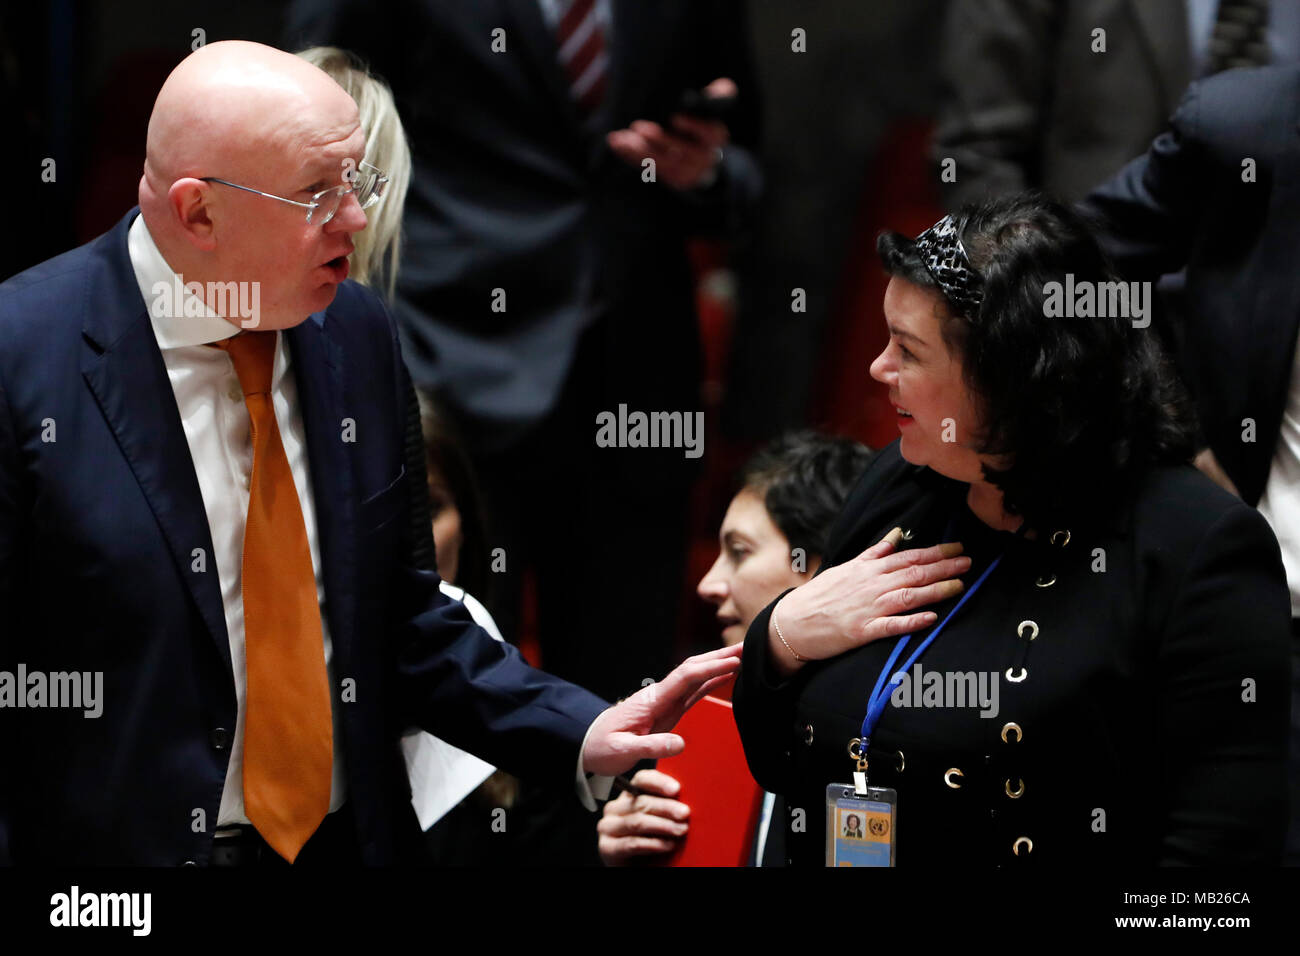 http://c8.alamy.com/comp/MB26CA/united-nations-un-headquarters-in-new-york-5th-apr-2018-british-ambassador-to-the-united-nations-karen-pierce-r-speaks-with-russian-ambassador-to-the-united-nations-vassily-nebenzia-prior-to-a-security-council-meeting-on-the-poisoning-of-former-russian-double-agent-sergei-skripal-and-his-daughter-yulia-skripal-at-the-un-headquarters-in-new-york-april-5-2018-credit-li-muzixinhuaalamy-live-news-MB26CA.jpg